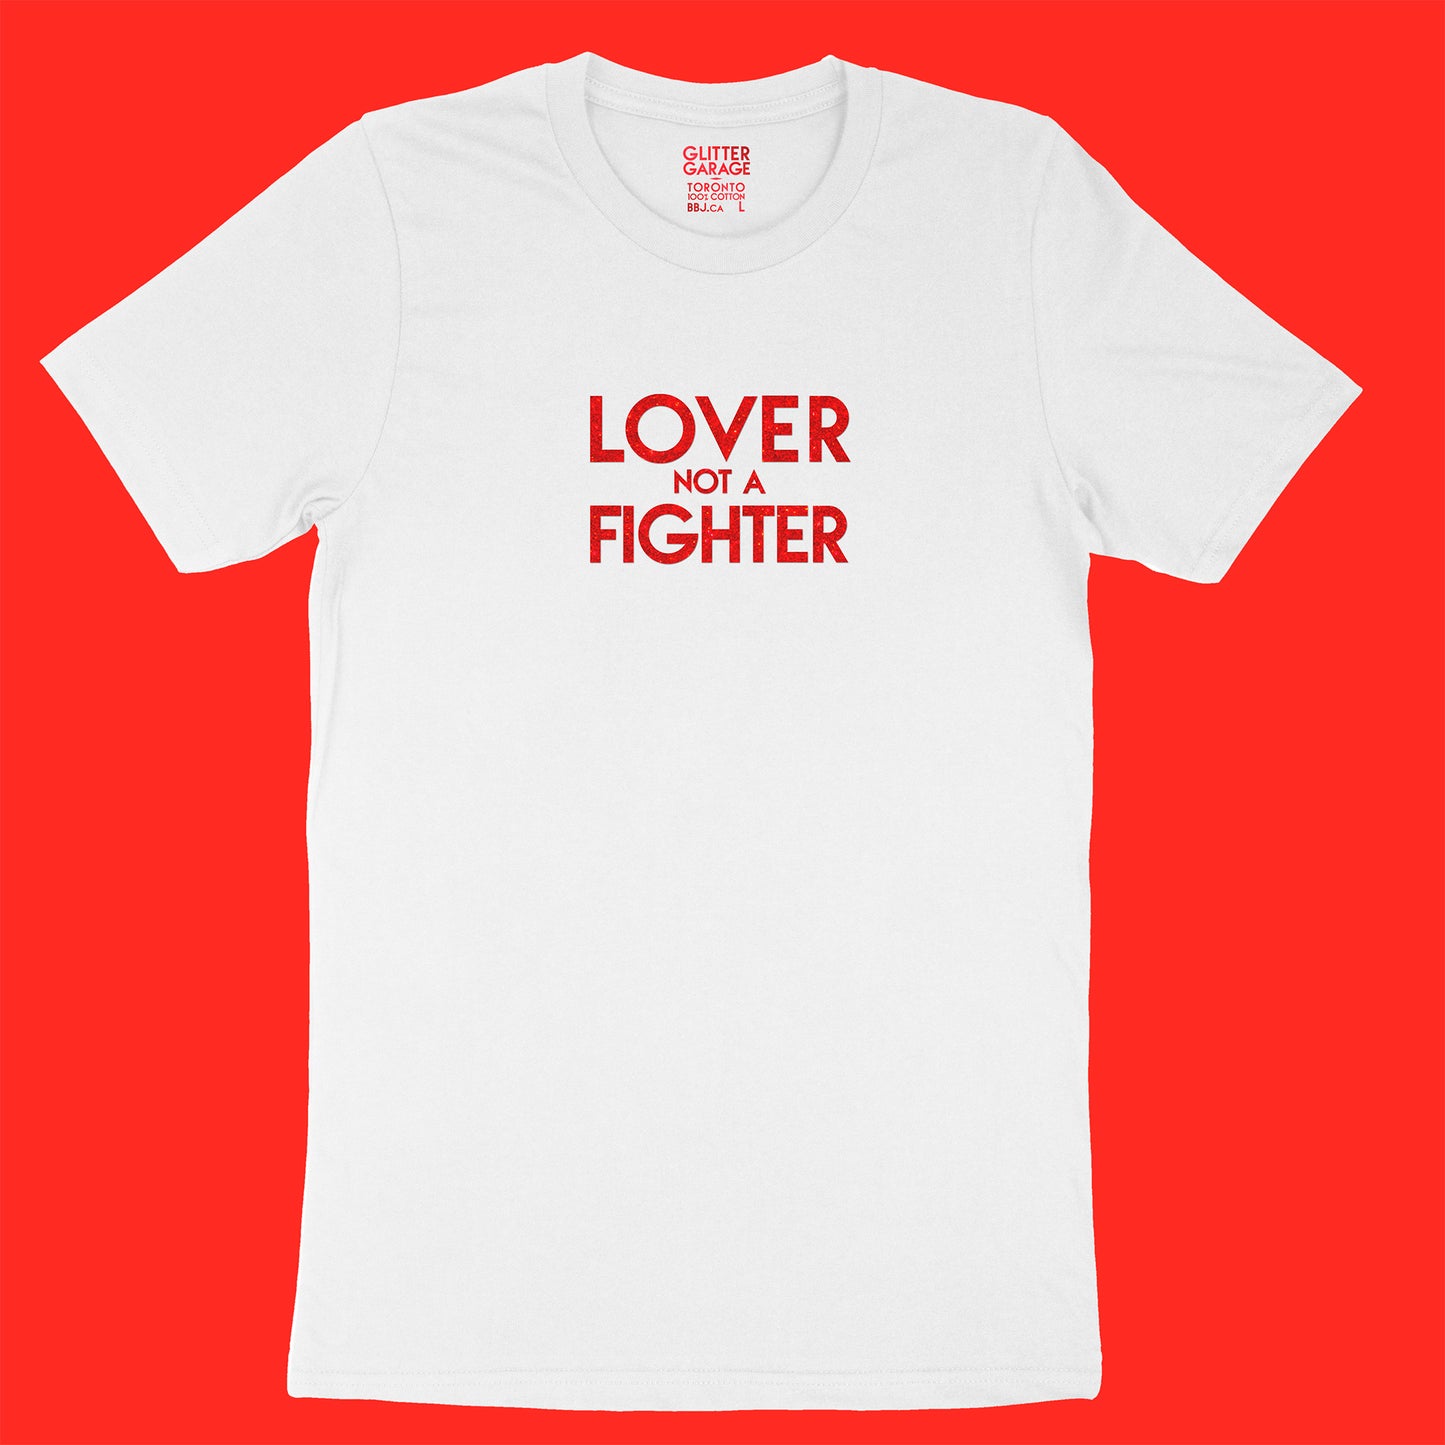 Custom text tee - Lover Not A Fighter - red glitter on white tee - USE YOUR WORDS white unisex t-shirt by BBJ / Glitter Garage